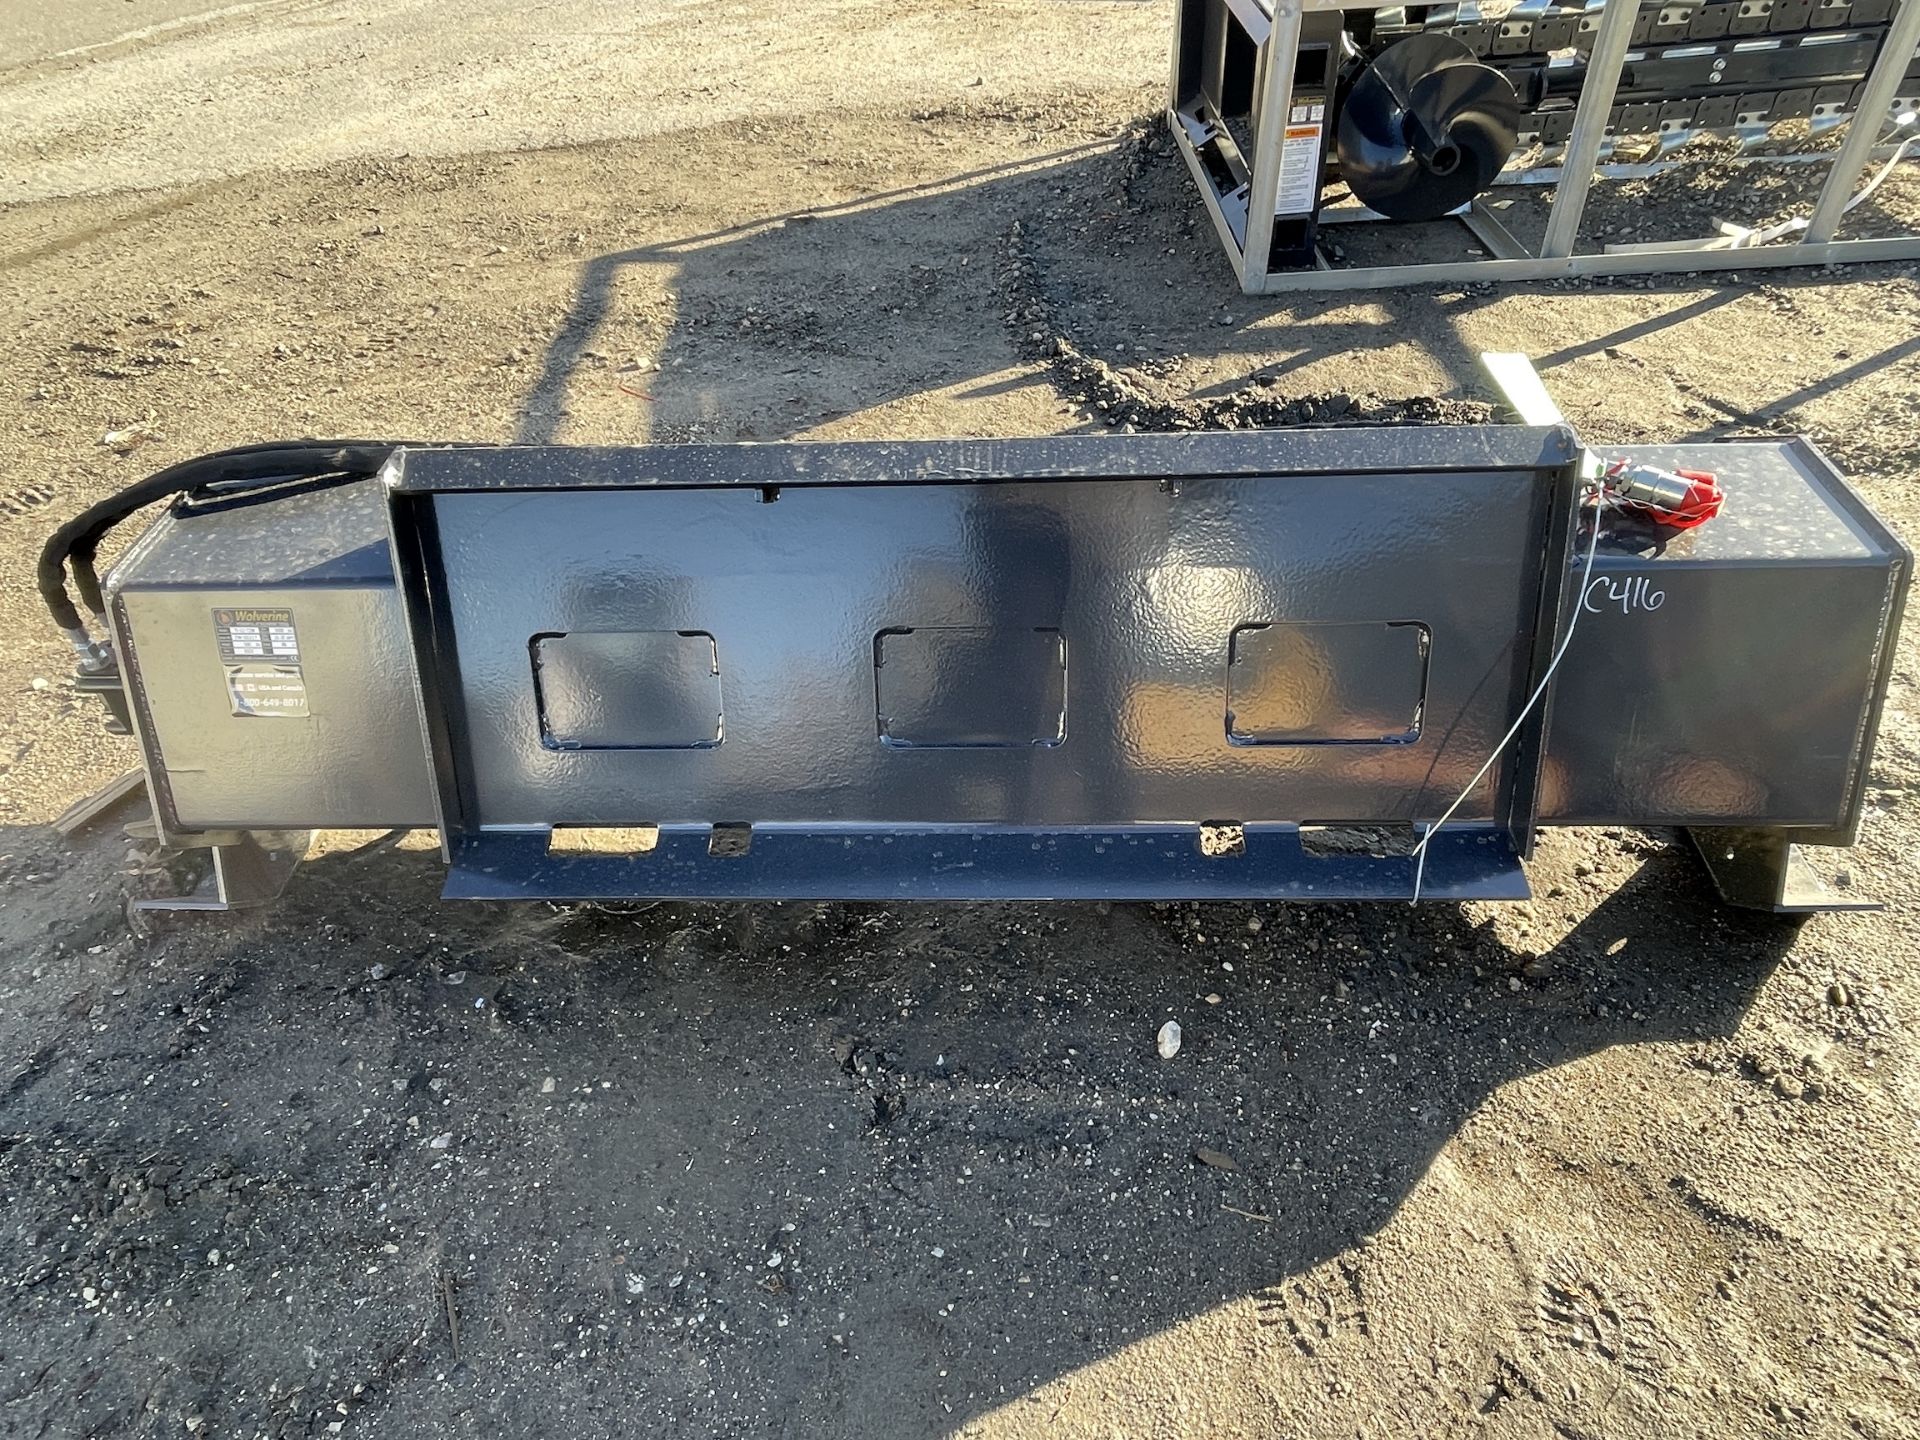 Brand New Wolverine 72" Hydraulic Rotary Tiller Attachment (C416E) - Image 3 of 7